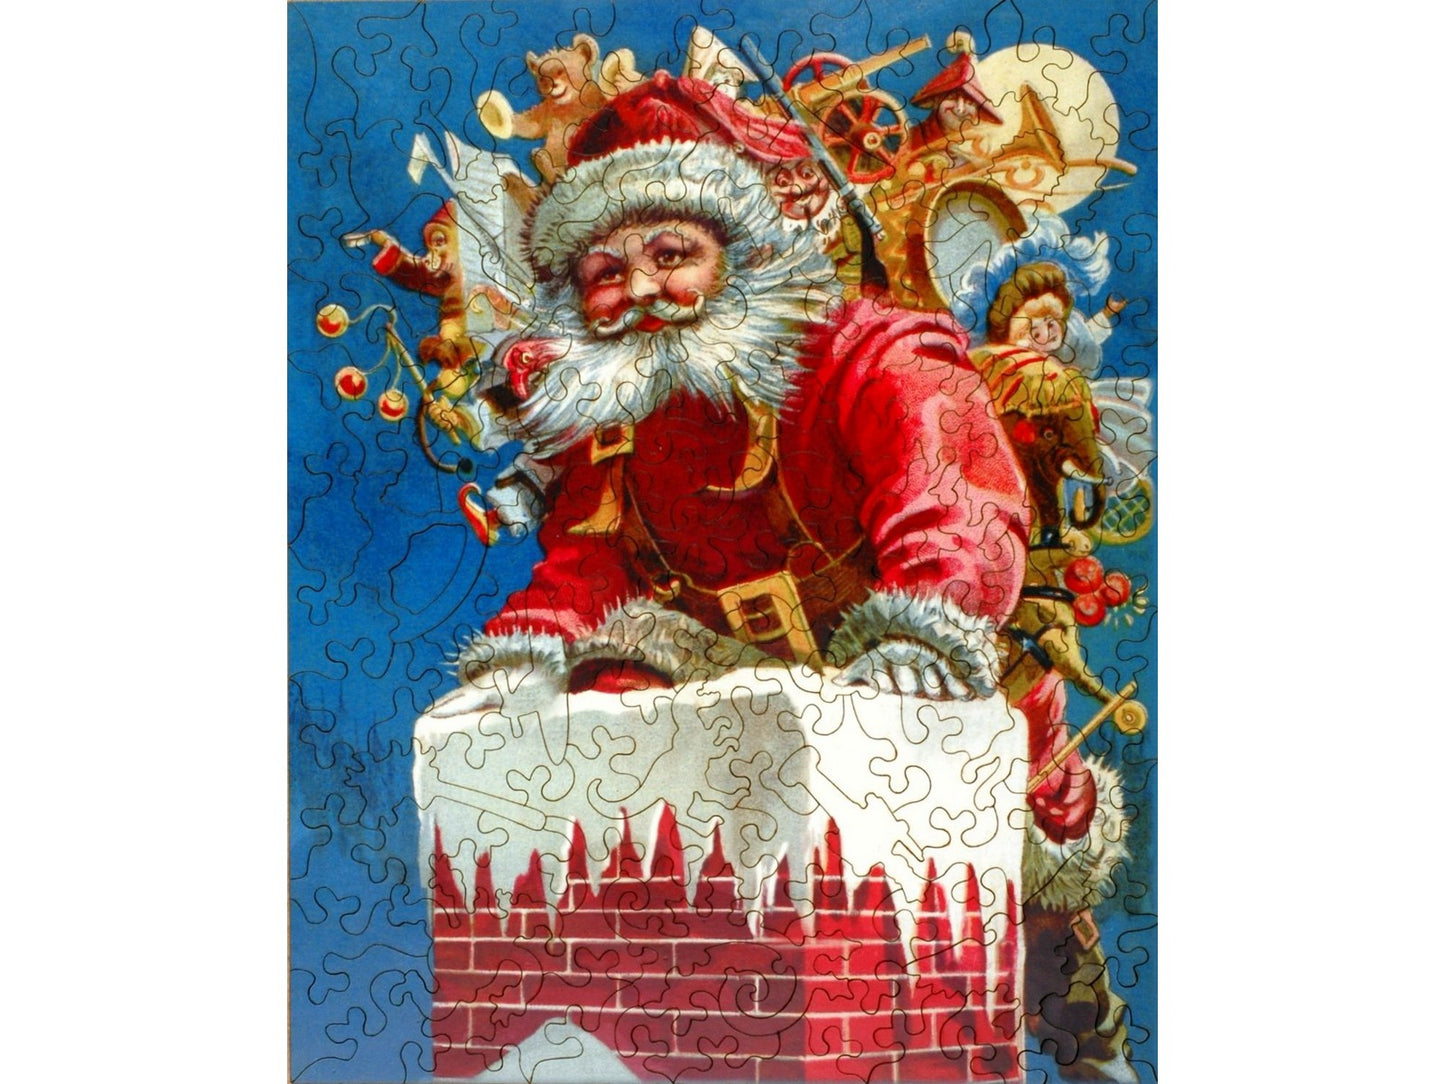 The front of the puzzle, Chimney Santa, which shows Santa Claus climbing into a chimney with lots of toys on his back.